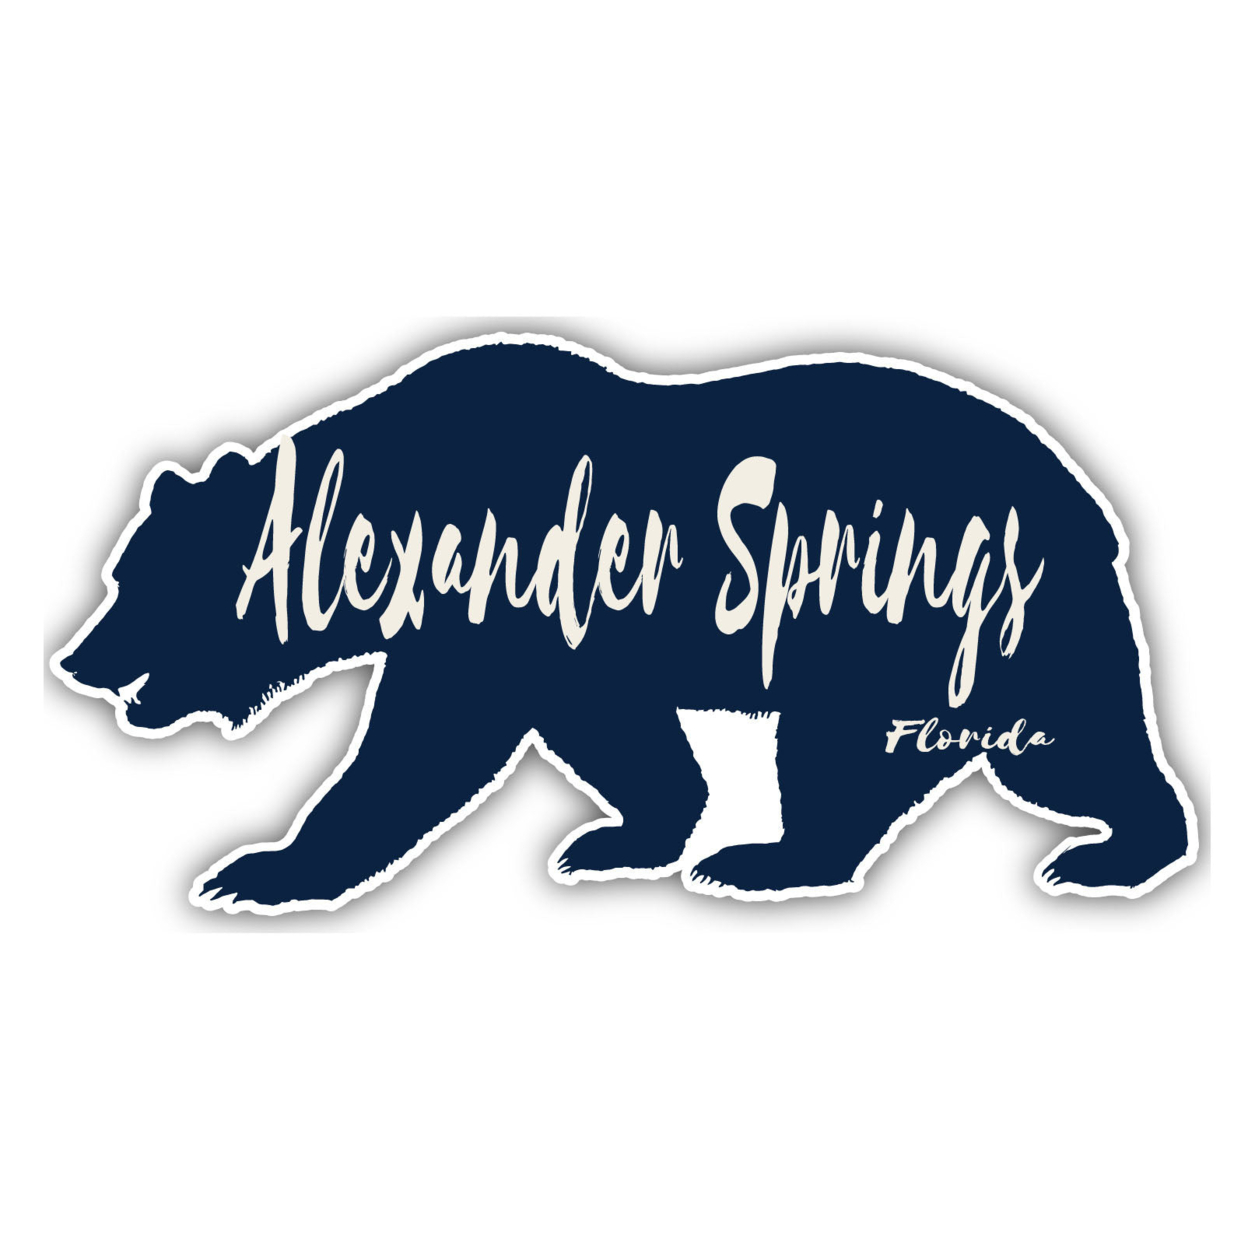 Alexander Springs Florida Souvenir Decorative Stickers (Choose Theme And Size) - 4-Pack, 2-Inch, Tent